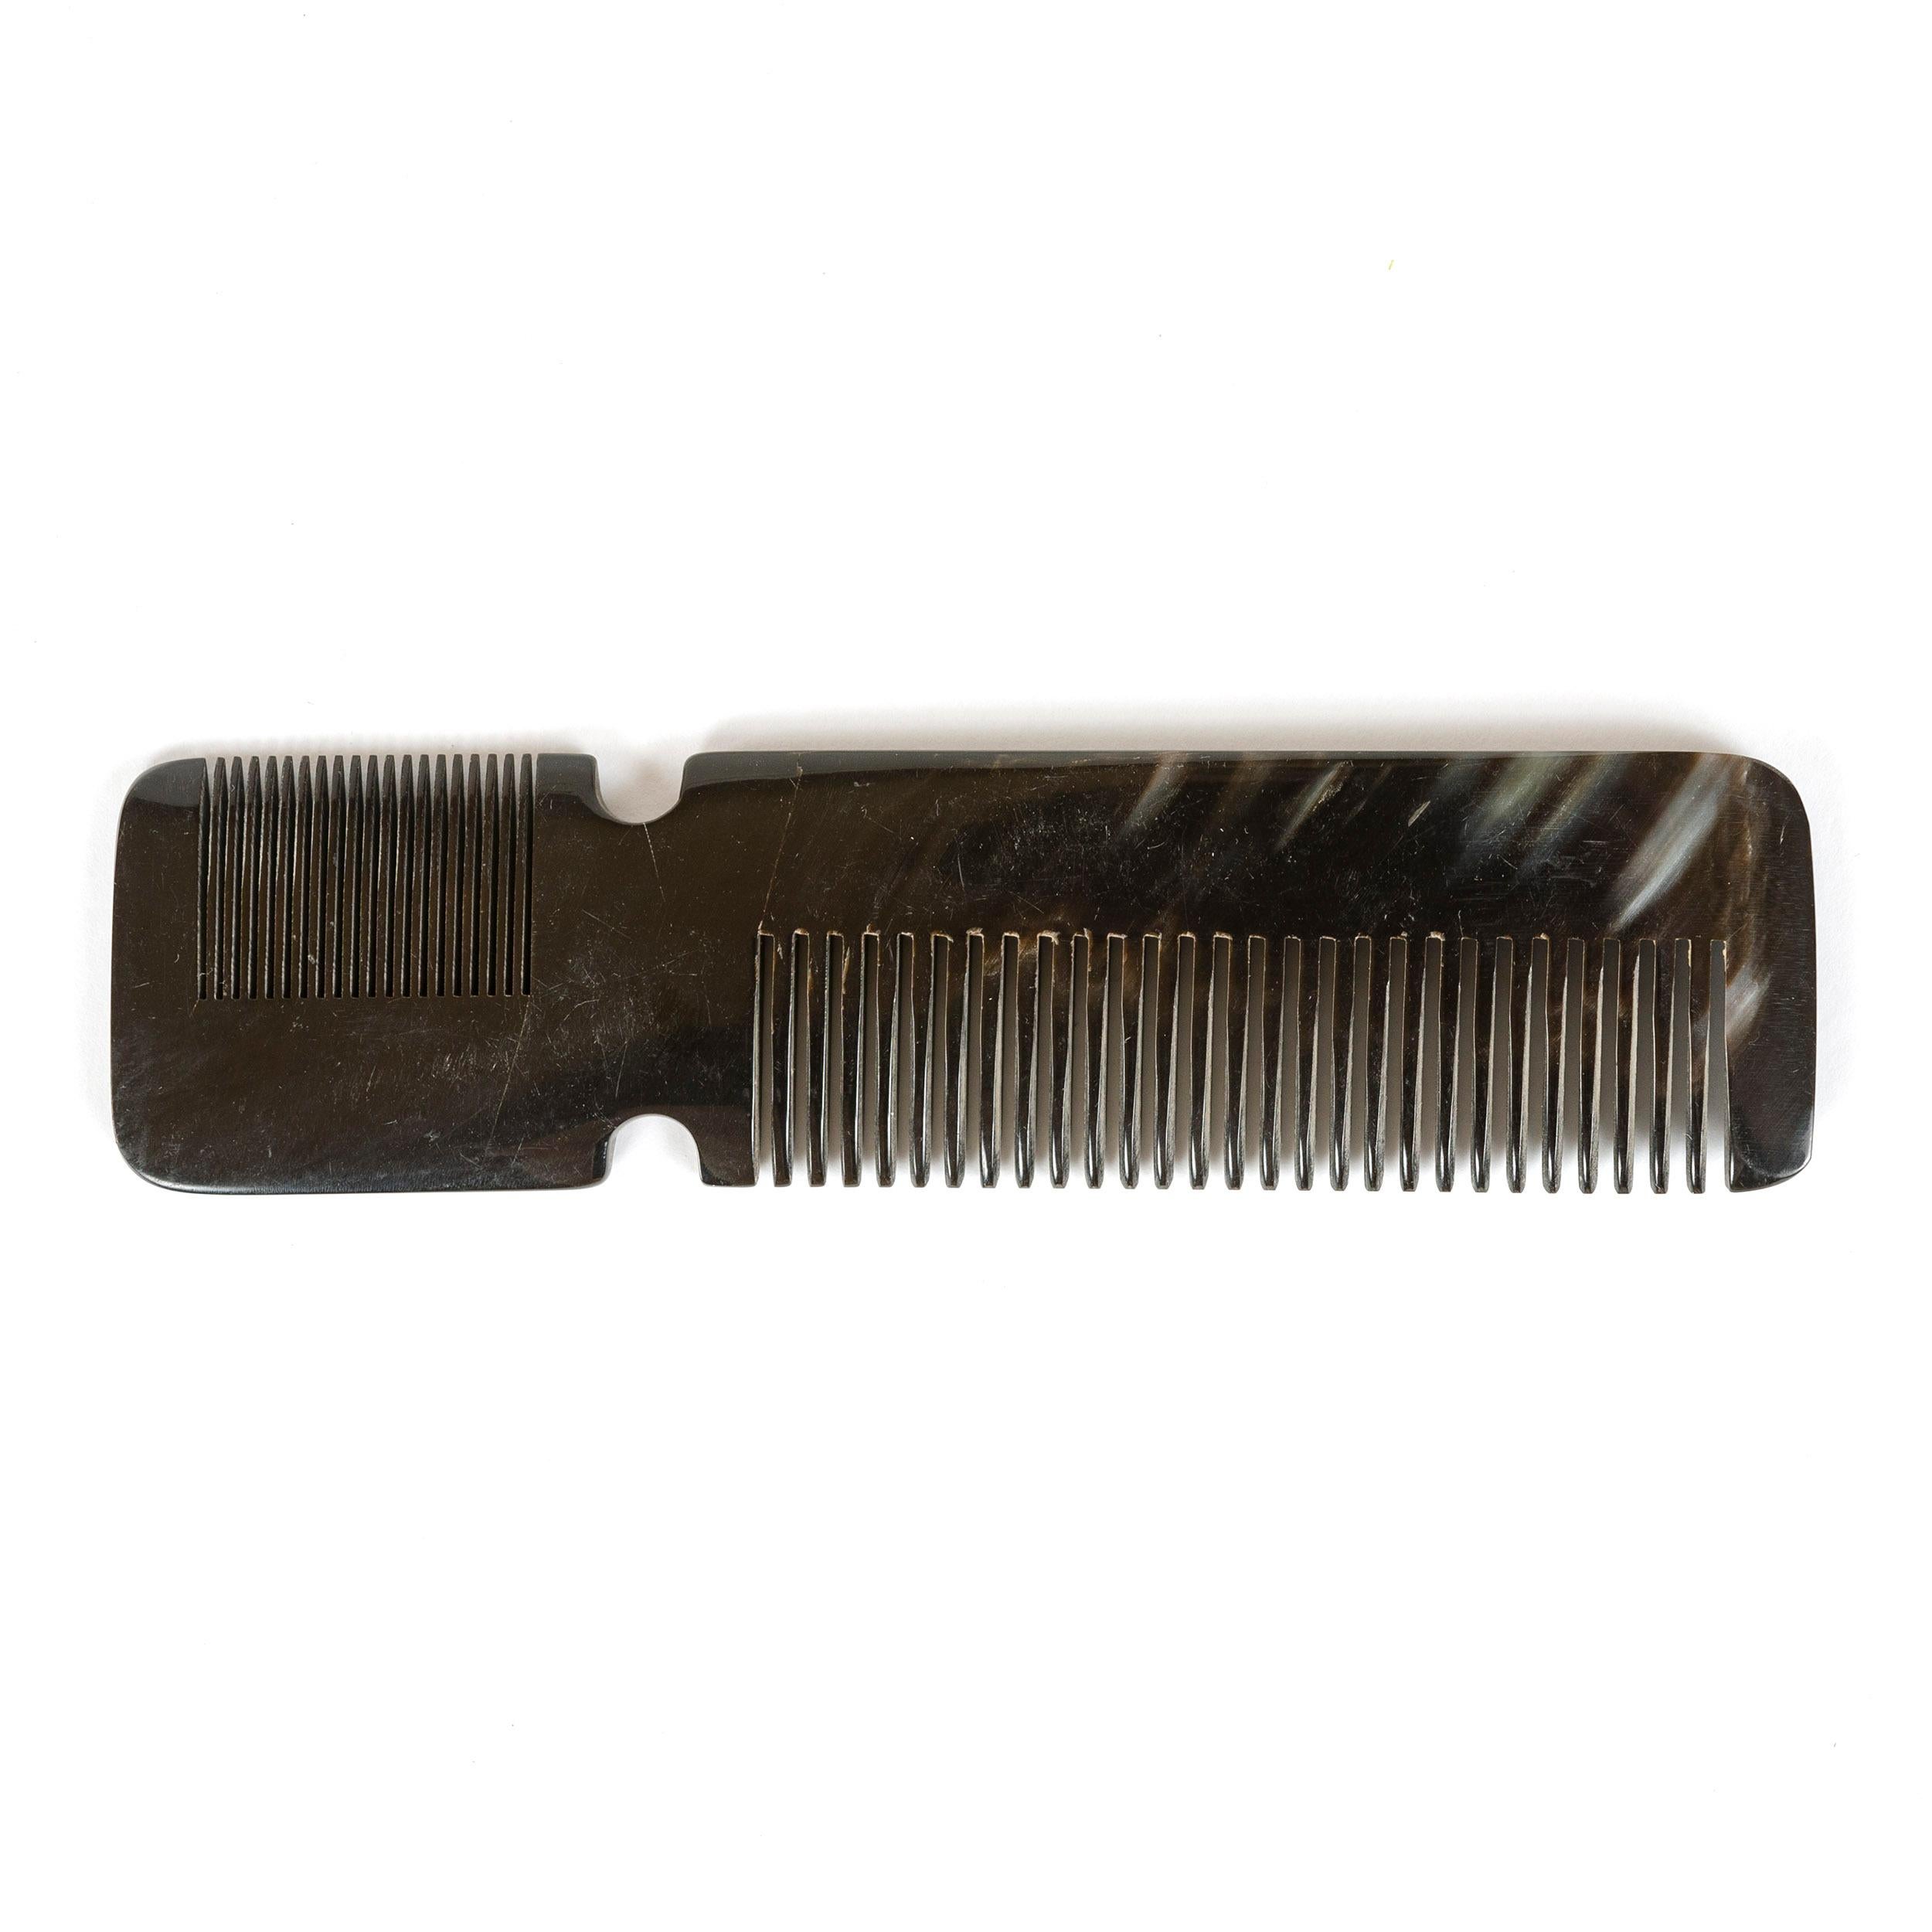 An elegant comb hand carved from cow horn with naturally occurring variations in color and pattern.